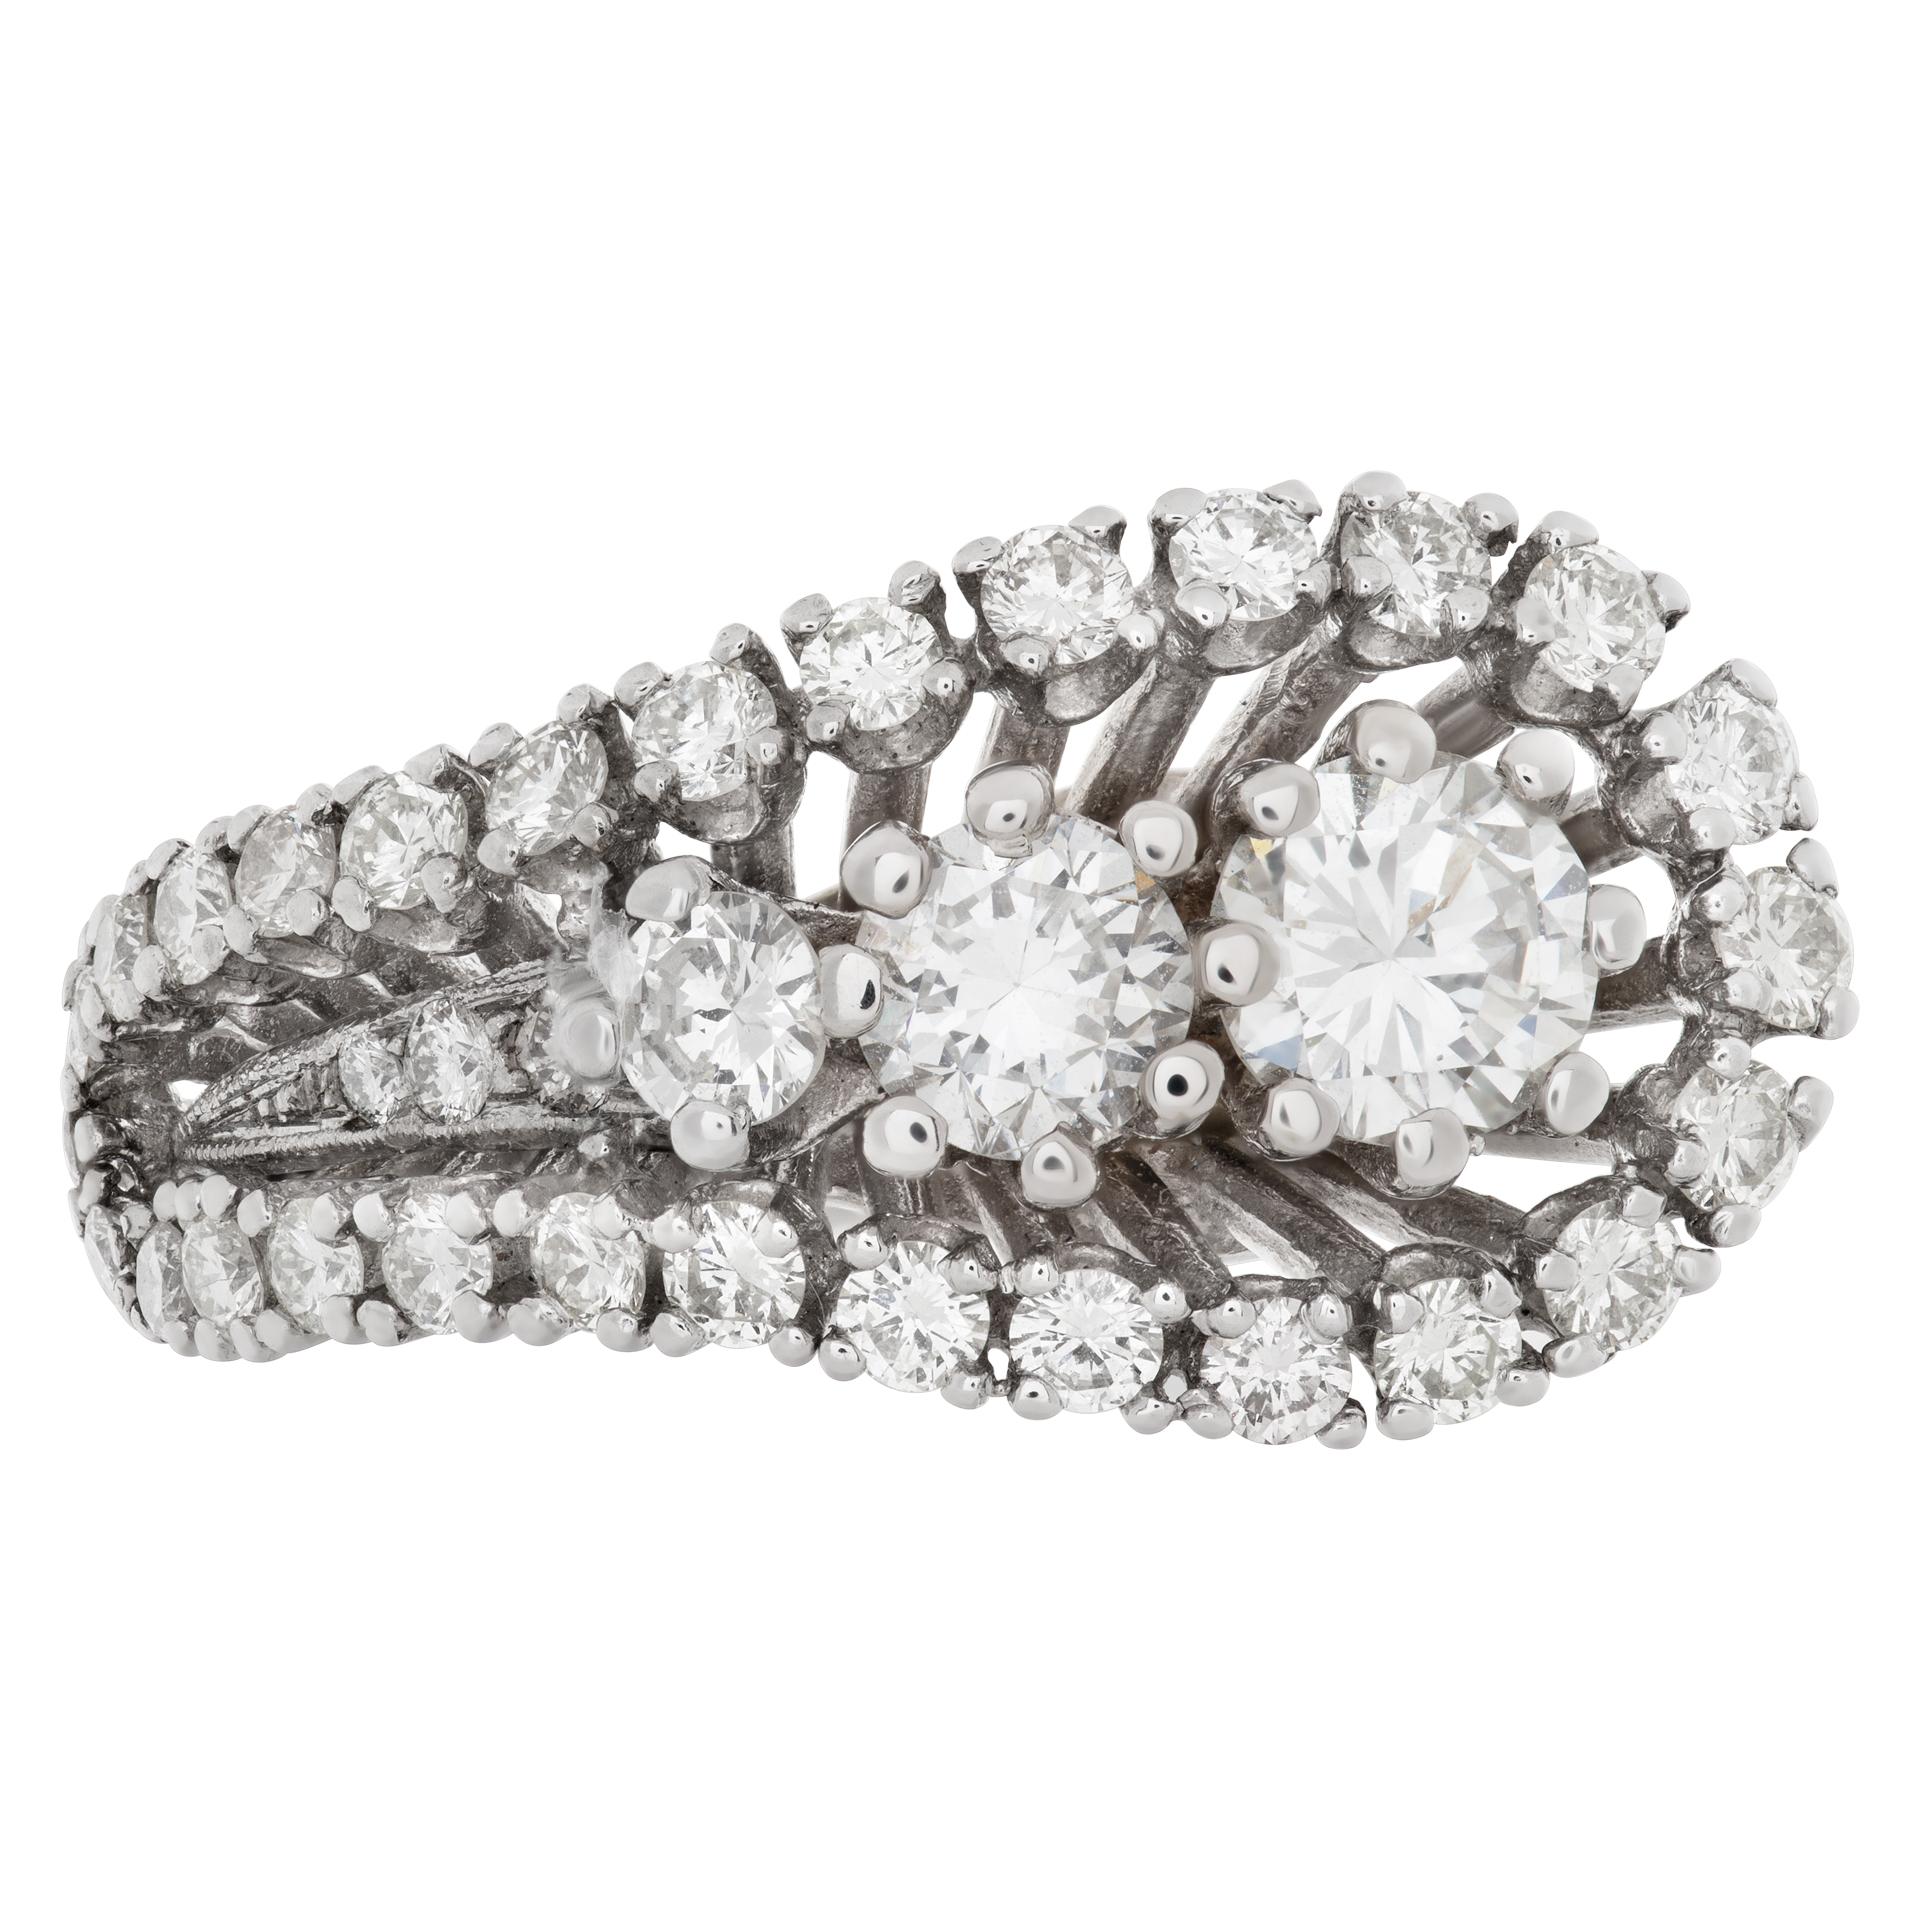 Beautiful swirl diamond ring in 14k white gold; approximately 2.00 carats in white clean diamonds, Circa 1950's. Size: 6.25<br /><br />This Diamond ring is currently size 6.25 and some items can be sized up or down, please ask! It weighs 5 gramms